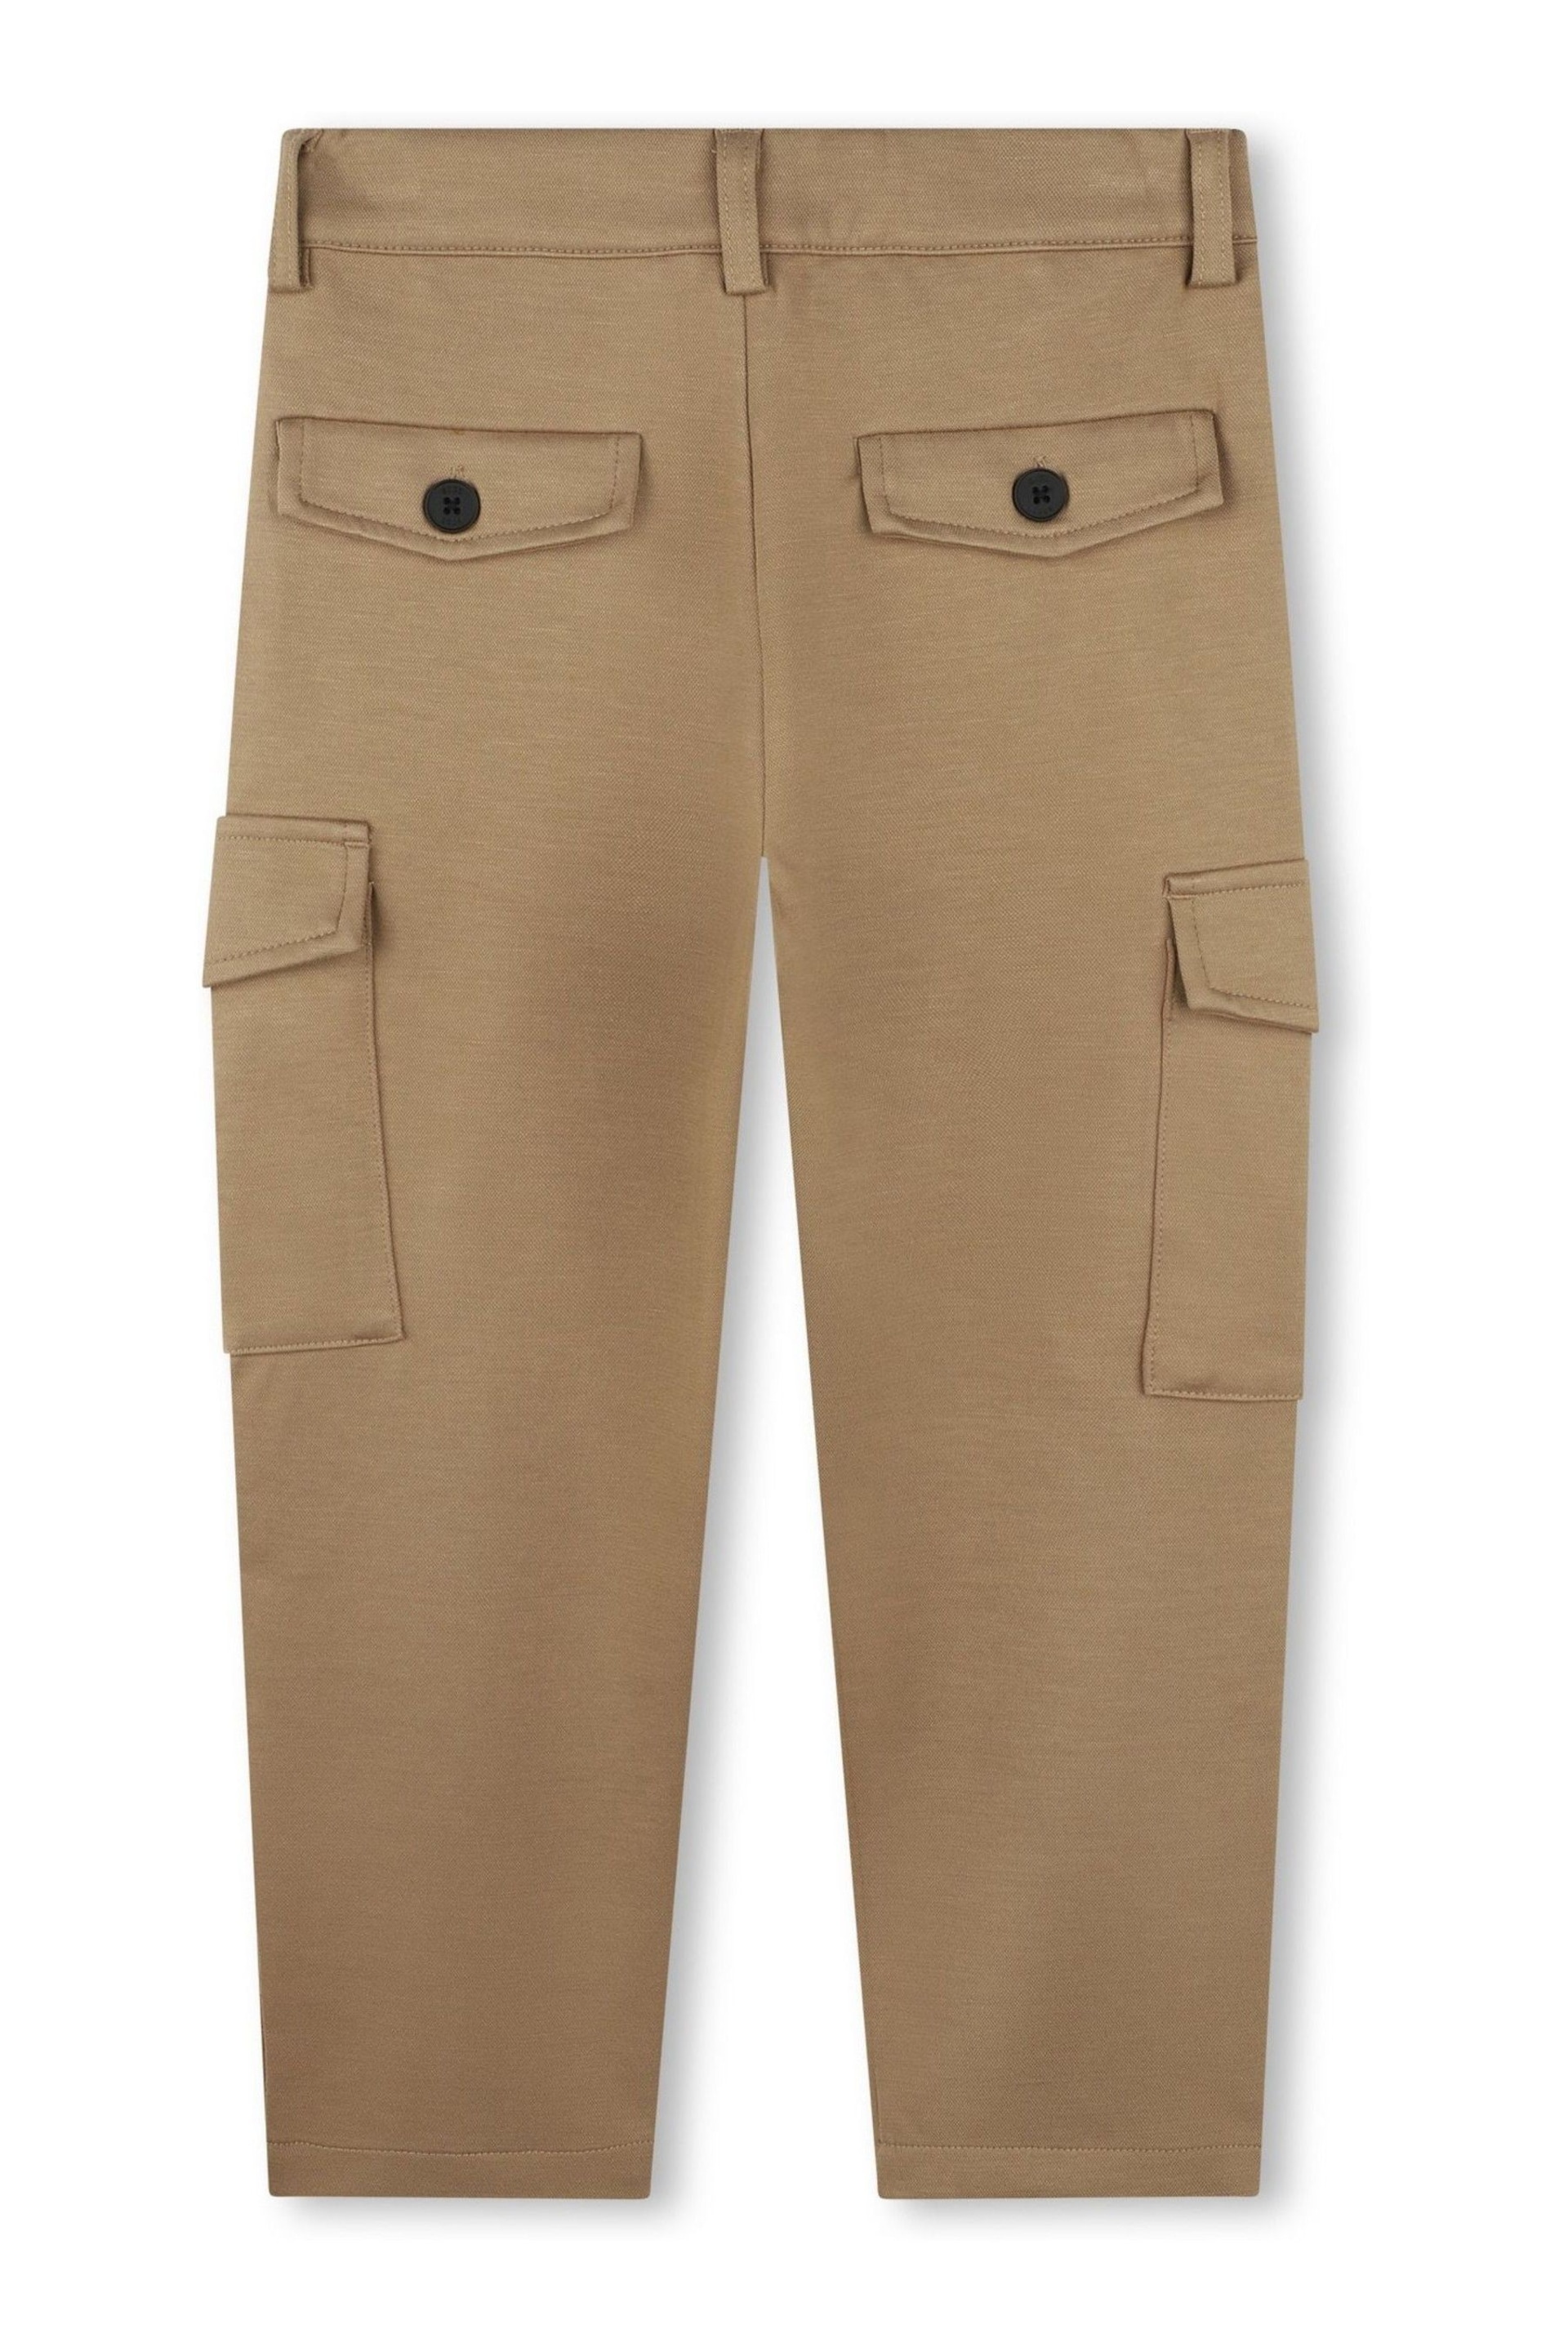 BOSS Brown Utility Cargo Pocket Trousers - Image 2 of 2